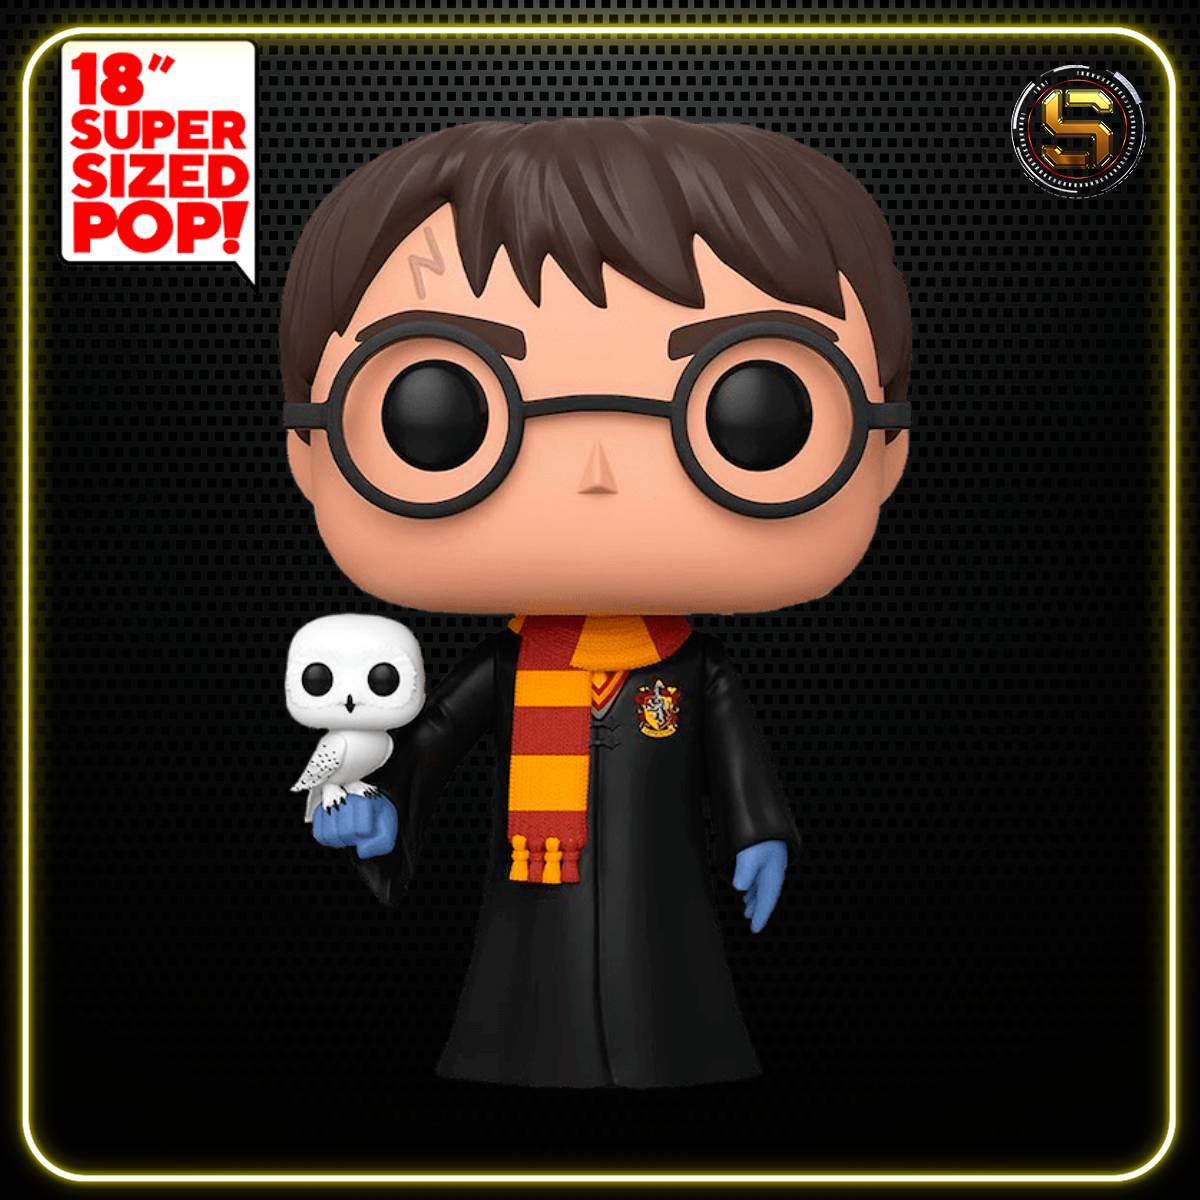 New Funko Pop! 18 Inch Harry Potter with Hedwig Super Sized Pop